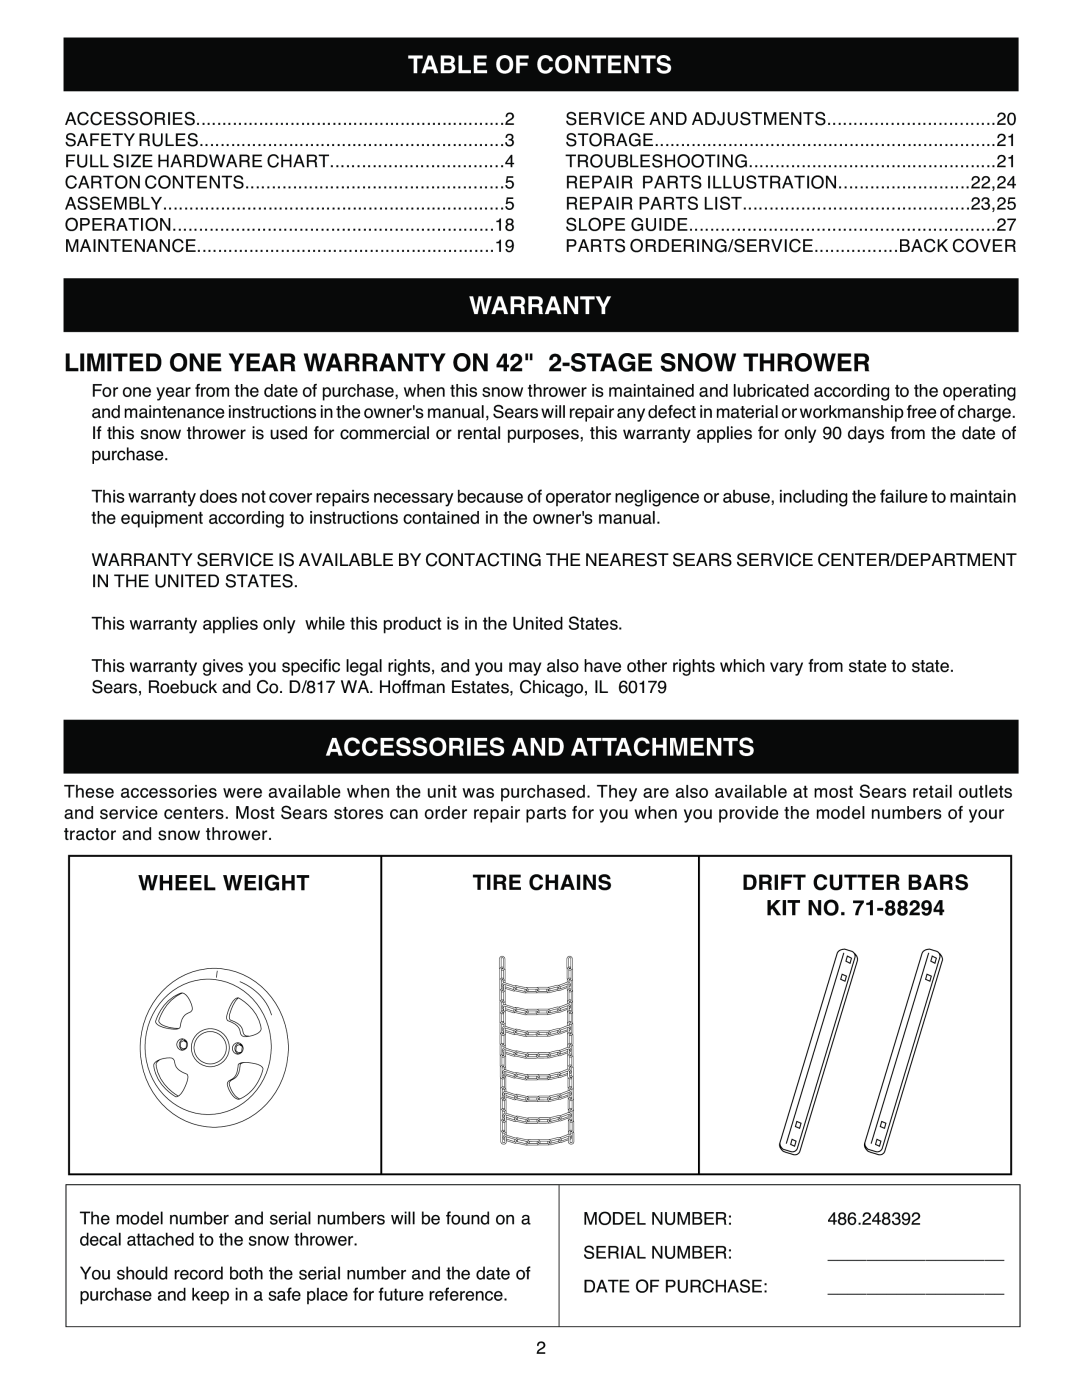 Sears 486.248392 owner manual Table Of Contents, Warranty, Accessories And Attachments, Wheel Weight, Tire Chains 